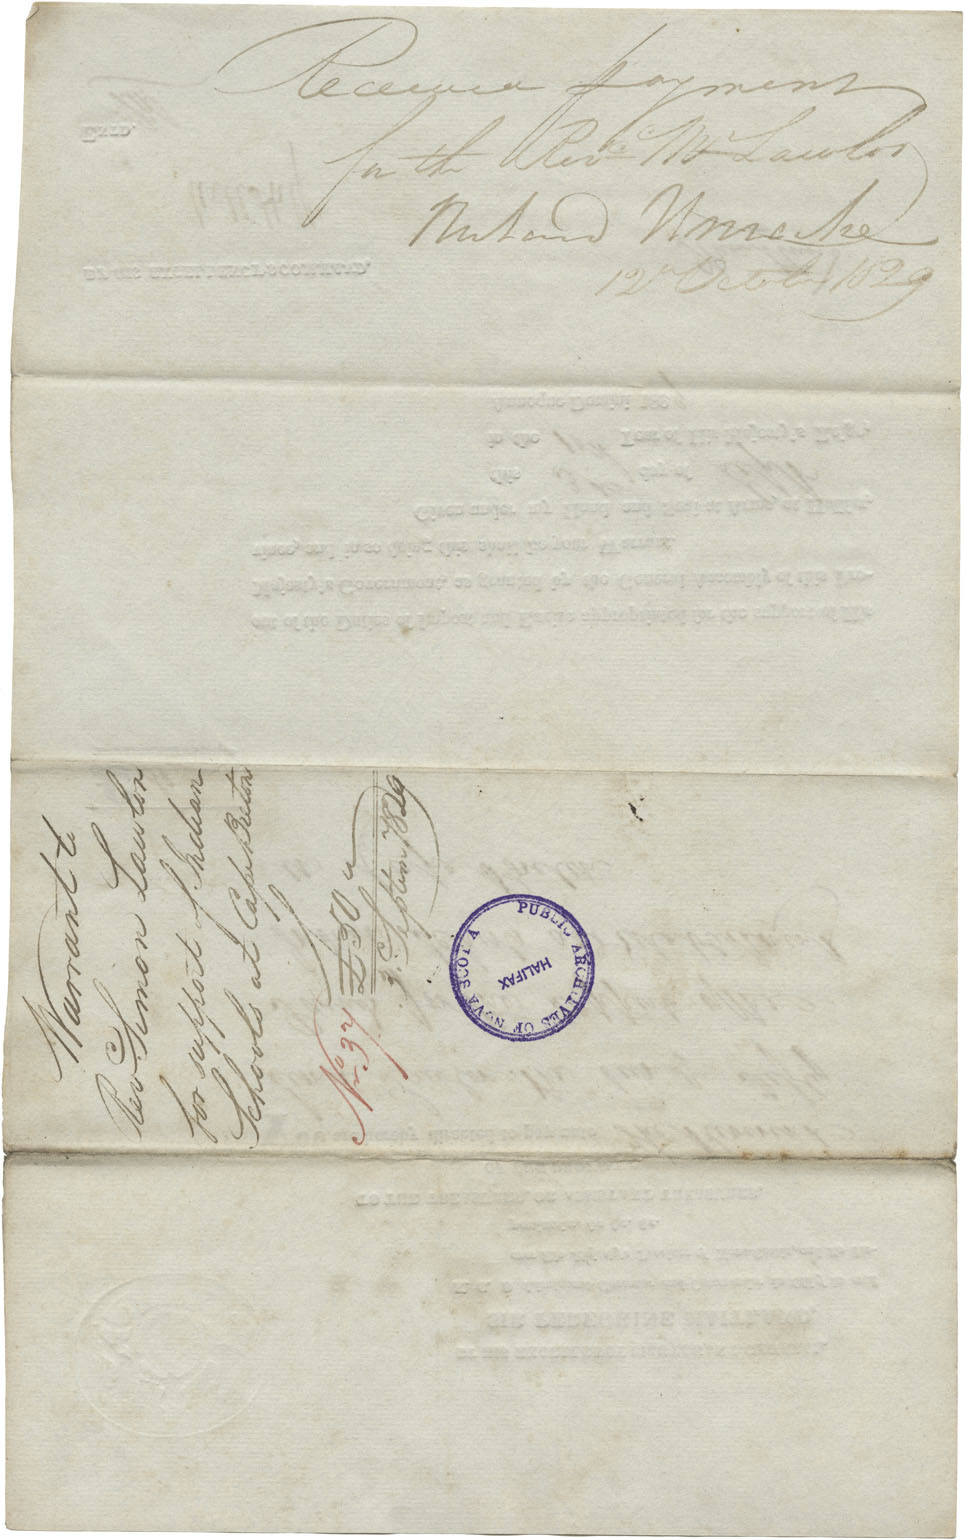 Sir Peregrine Maitland's order to the Provincial Treasurer, to pay the Rev. Simon Lawler £50-0-0 for the support of the 'Indian Schools' and establishments in Cape Breton. 